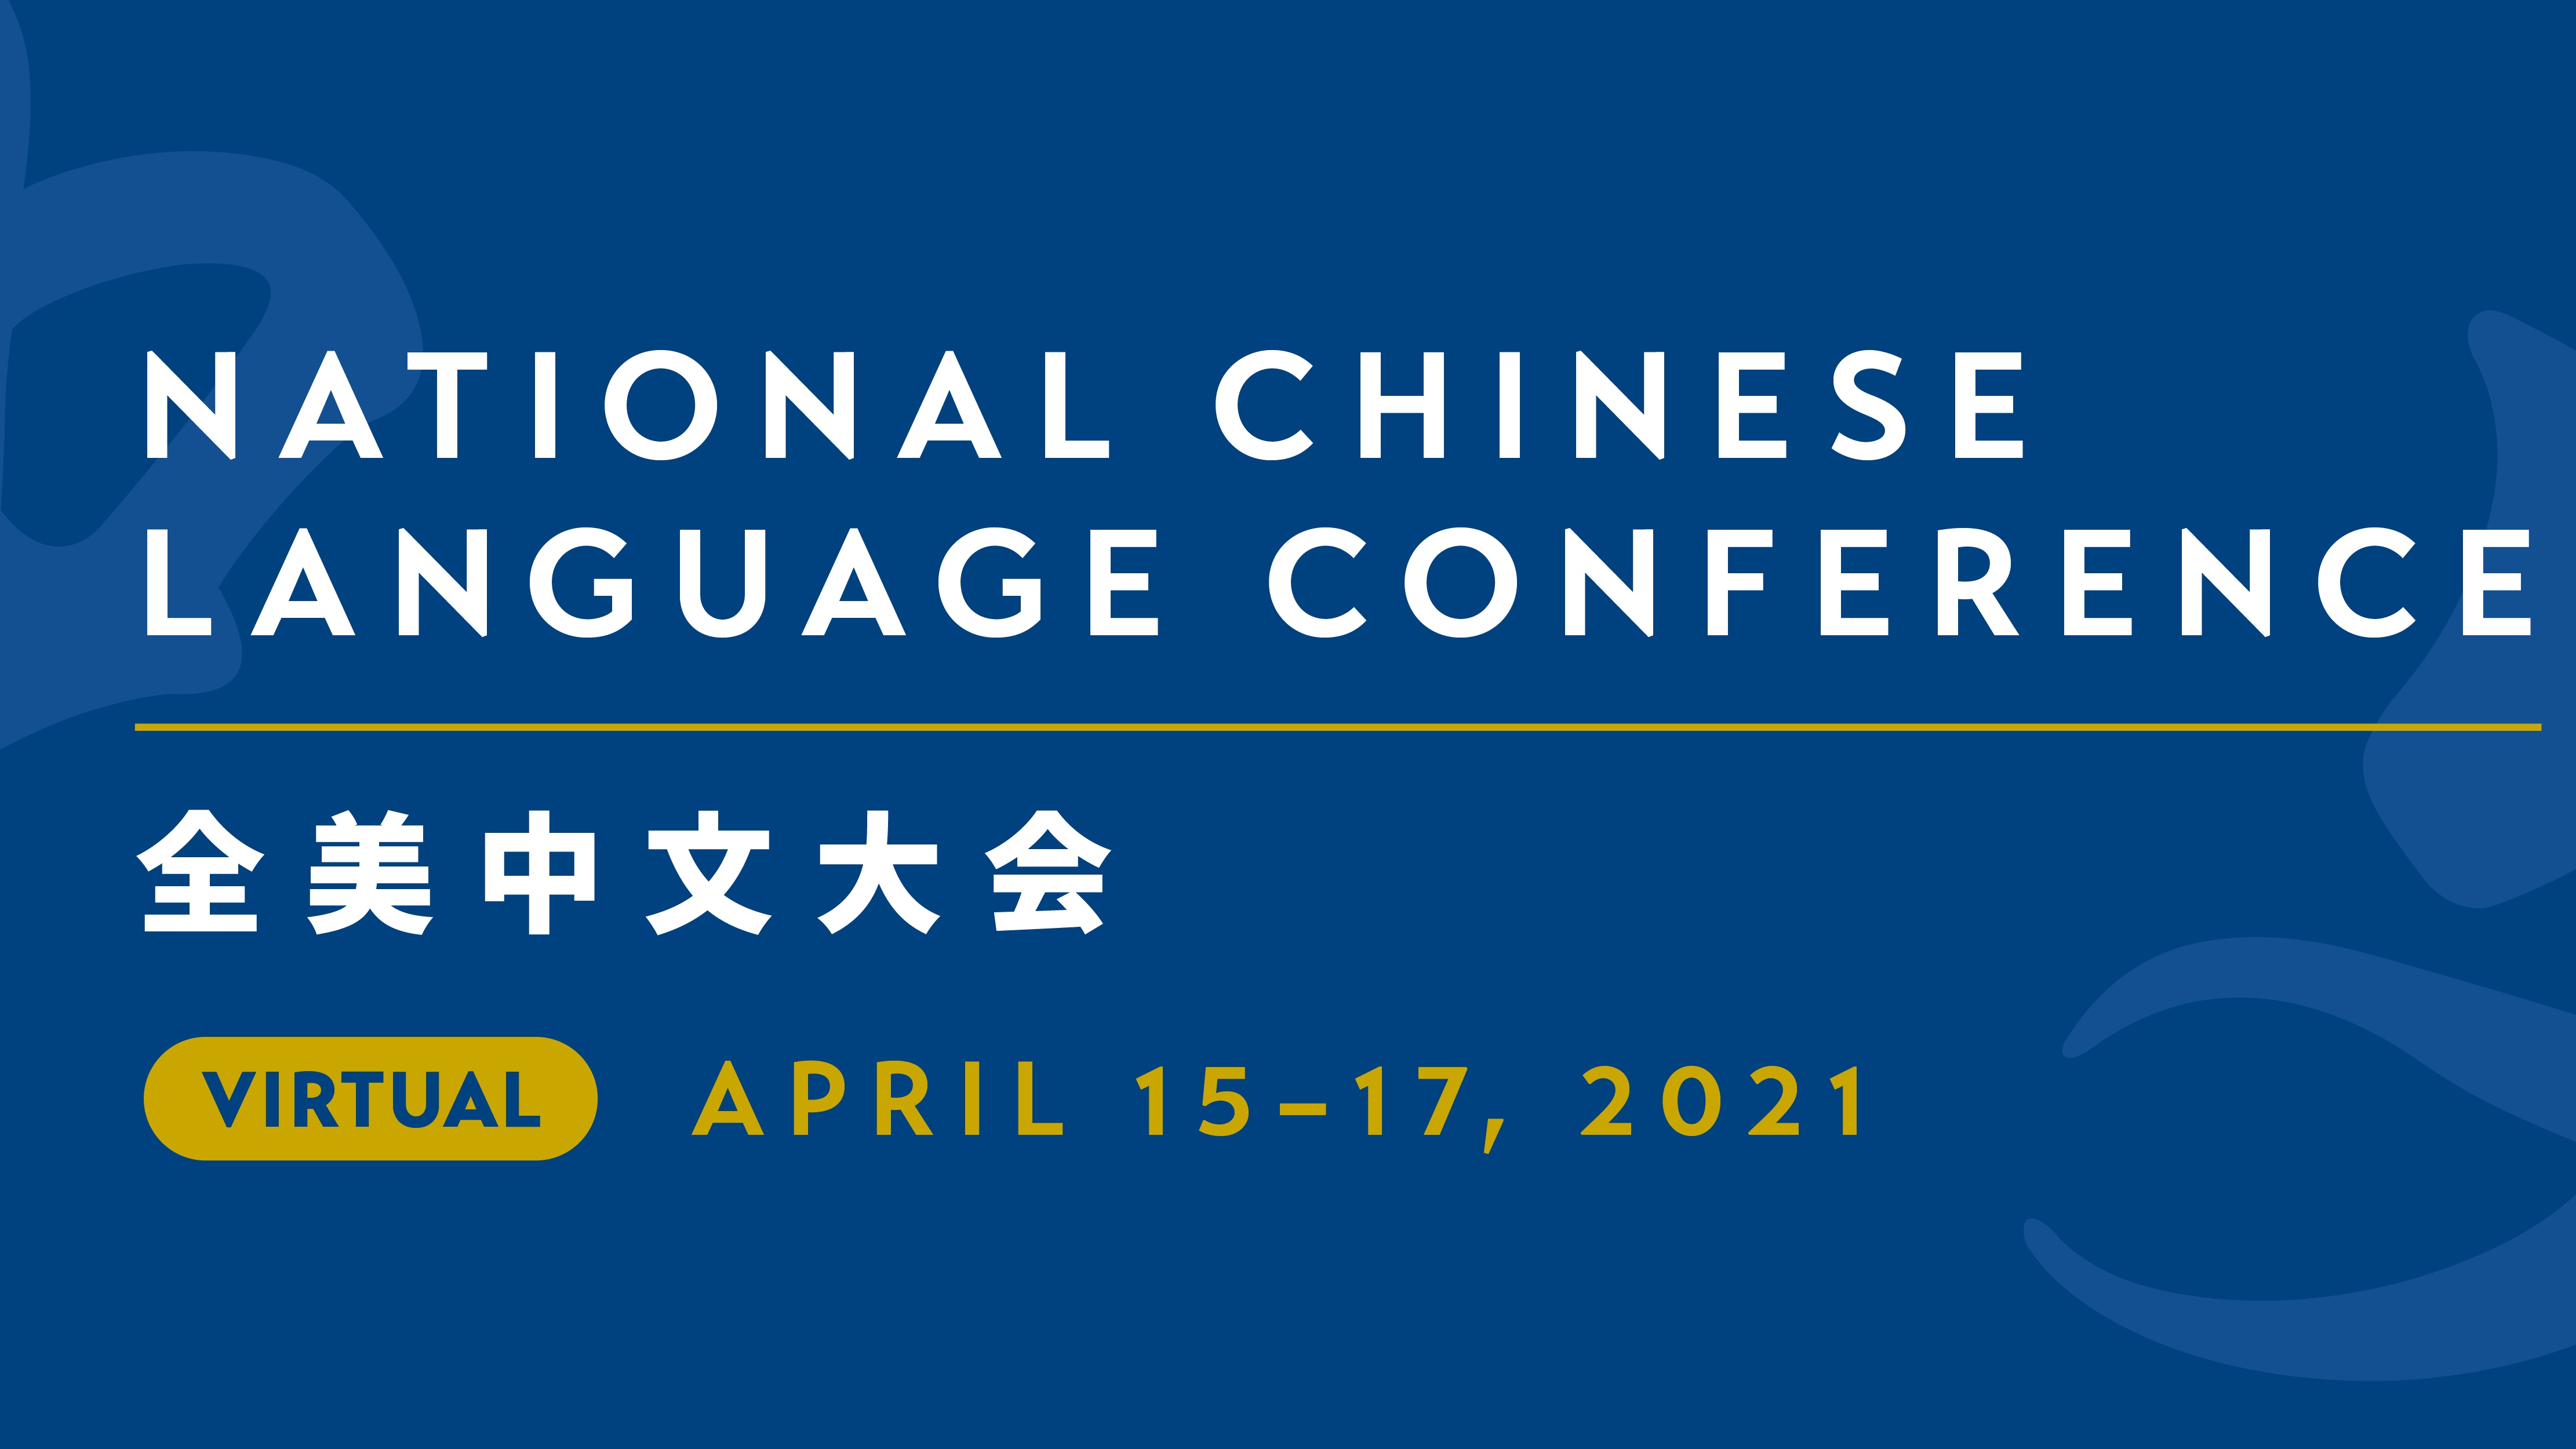 2021 National Chinese Language Conference SponsorMyEvent